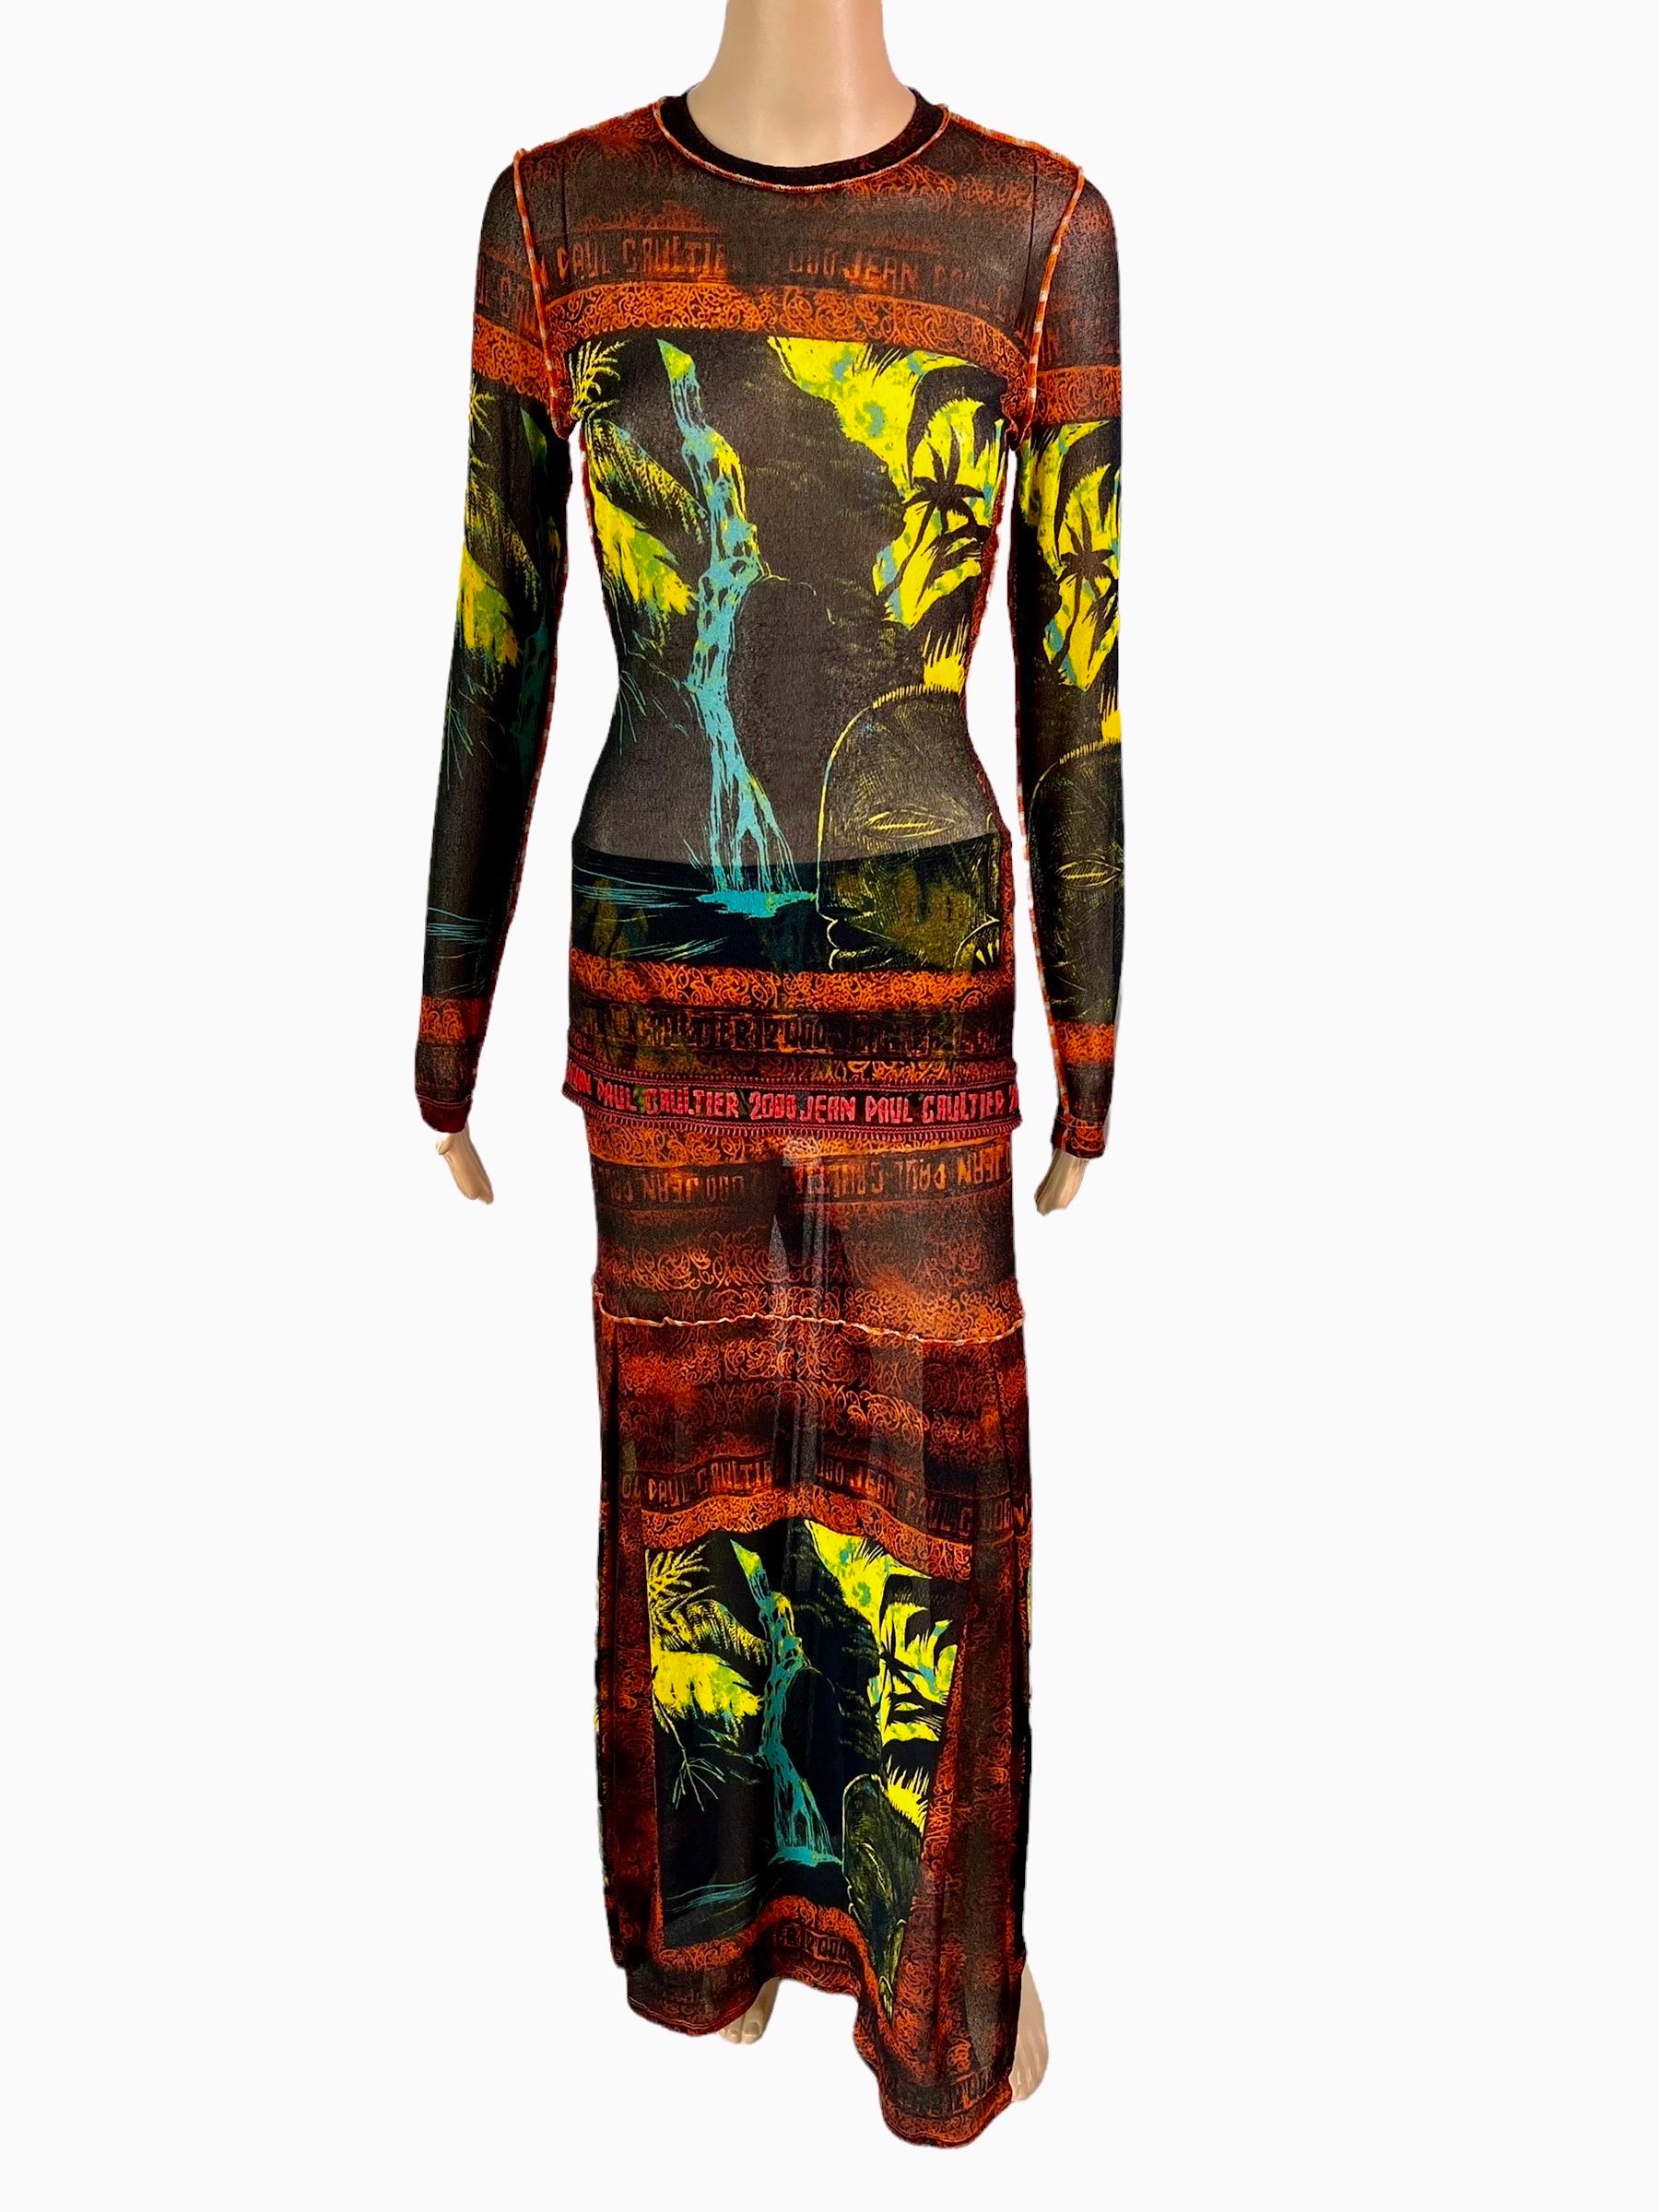 Jean Paul Gaultier Classique S/S 2000 Abstract Psychedelic Print Sheer Mesh Top & Maxi Skirt Ensemble 2 Piece Set 

Please note the size tag on the skirt is L and the top is M.

